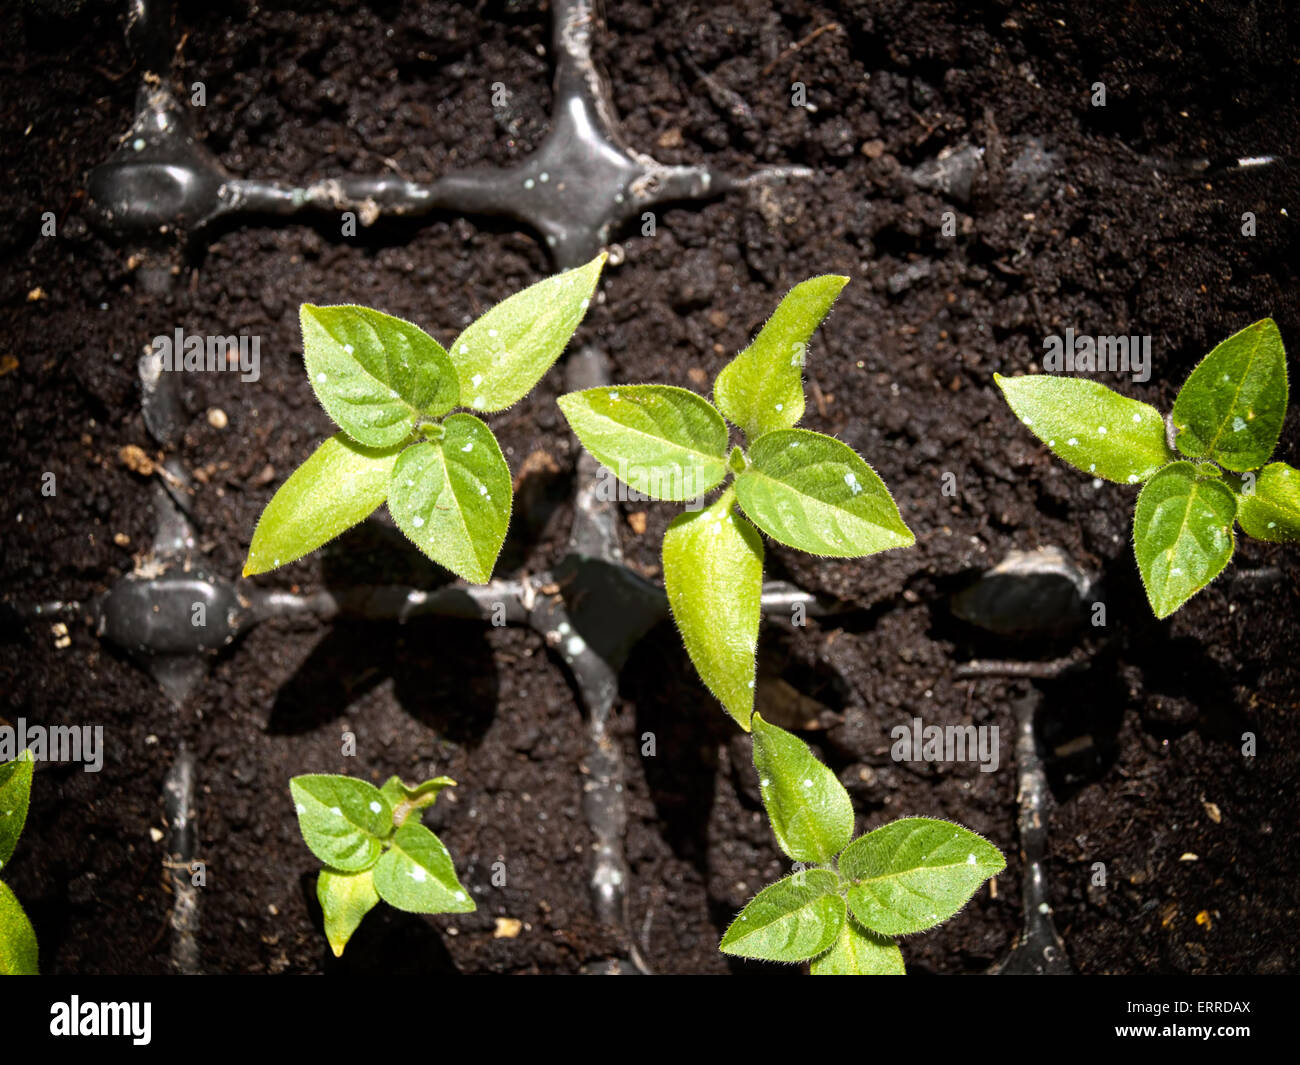 Top view on small peppers plants after germination. Stock Photo